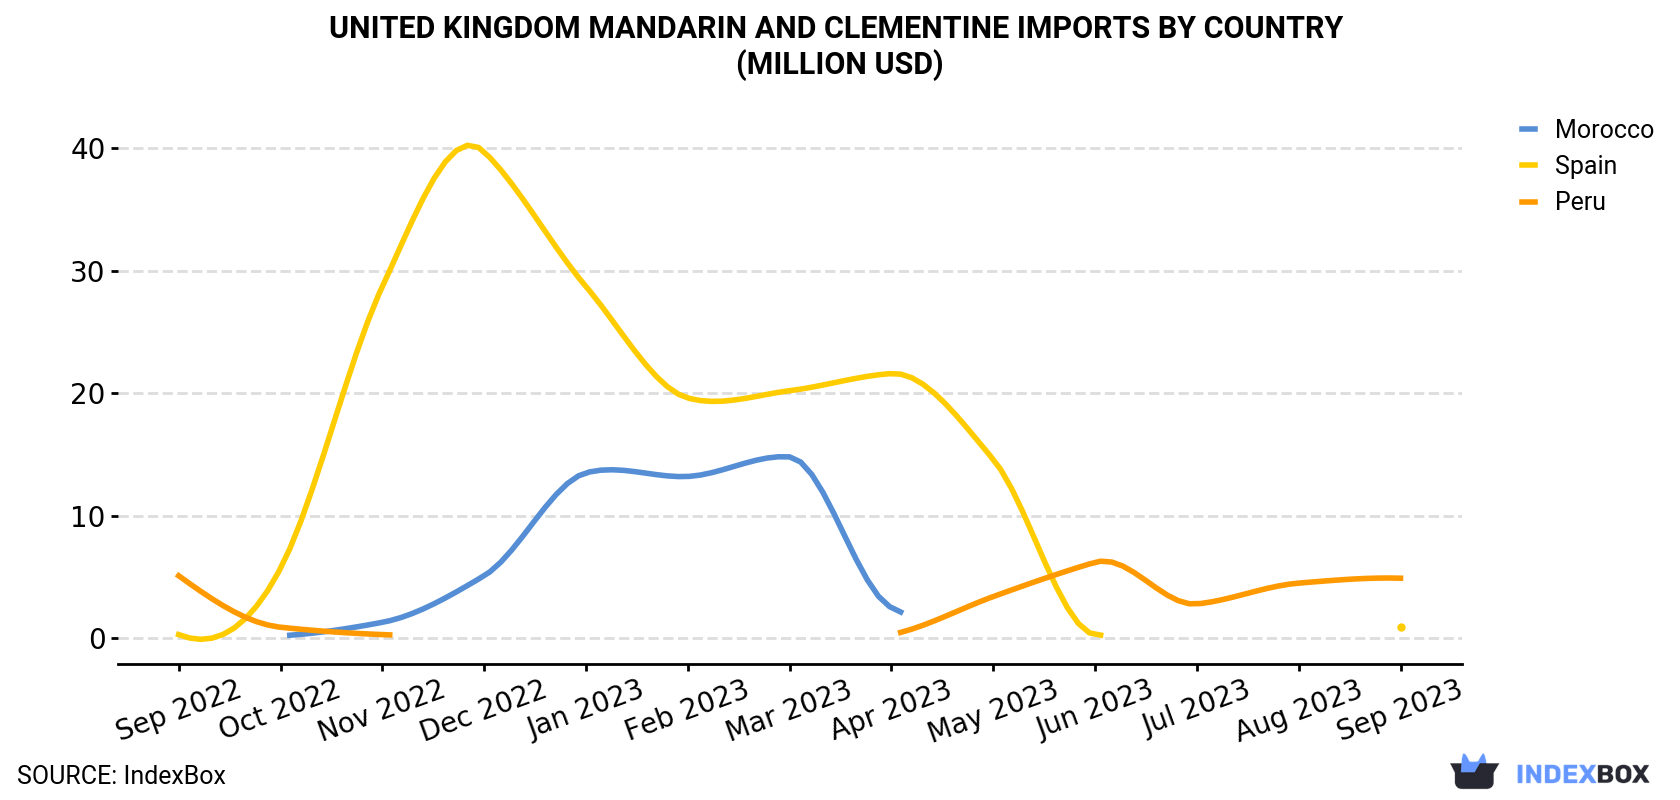 United Kingdom Mandarin and Clementine Imports By Country (Million USD)